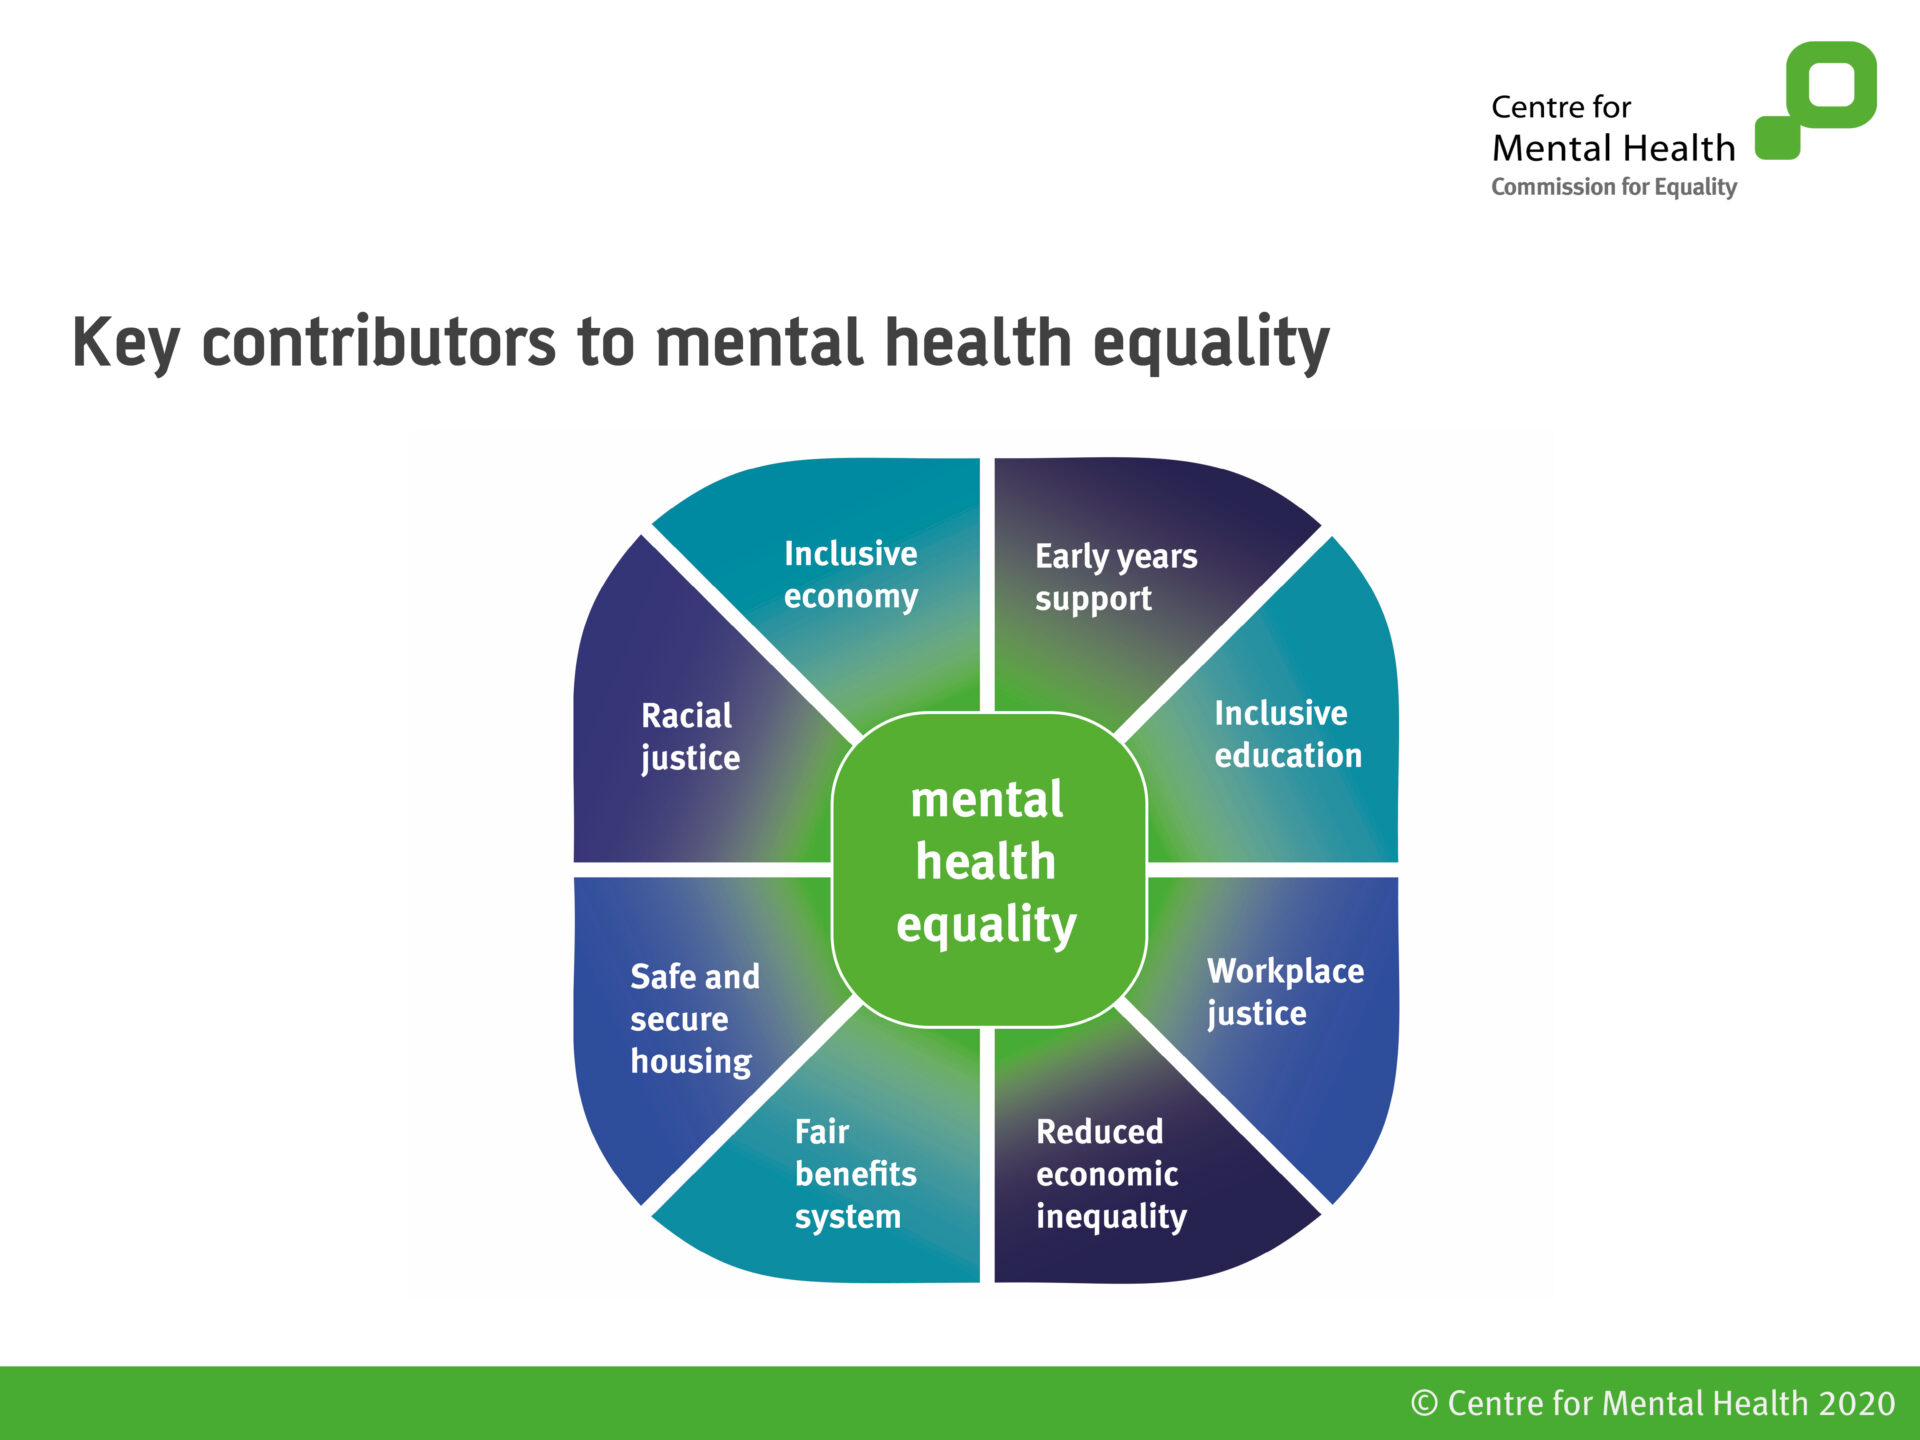 Key contributors to mental health equality: Early years support, inclusive education, workplace justice, reduced economic inequality, fair benefits system, safe and secure housing, racial justice, inclusive economy